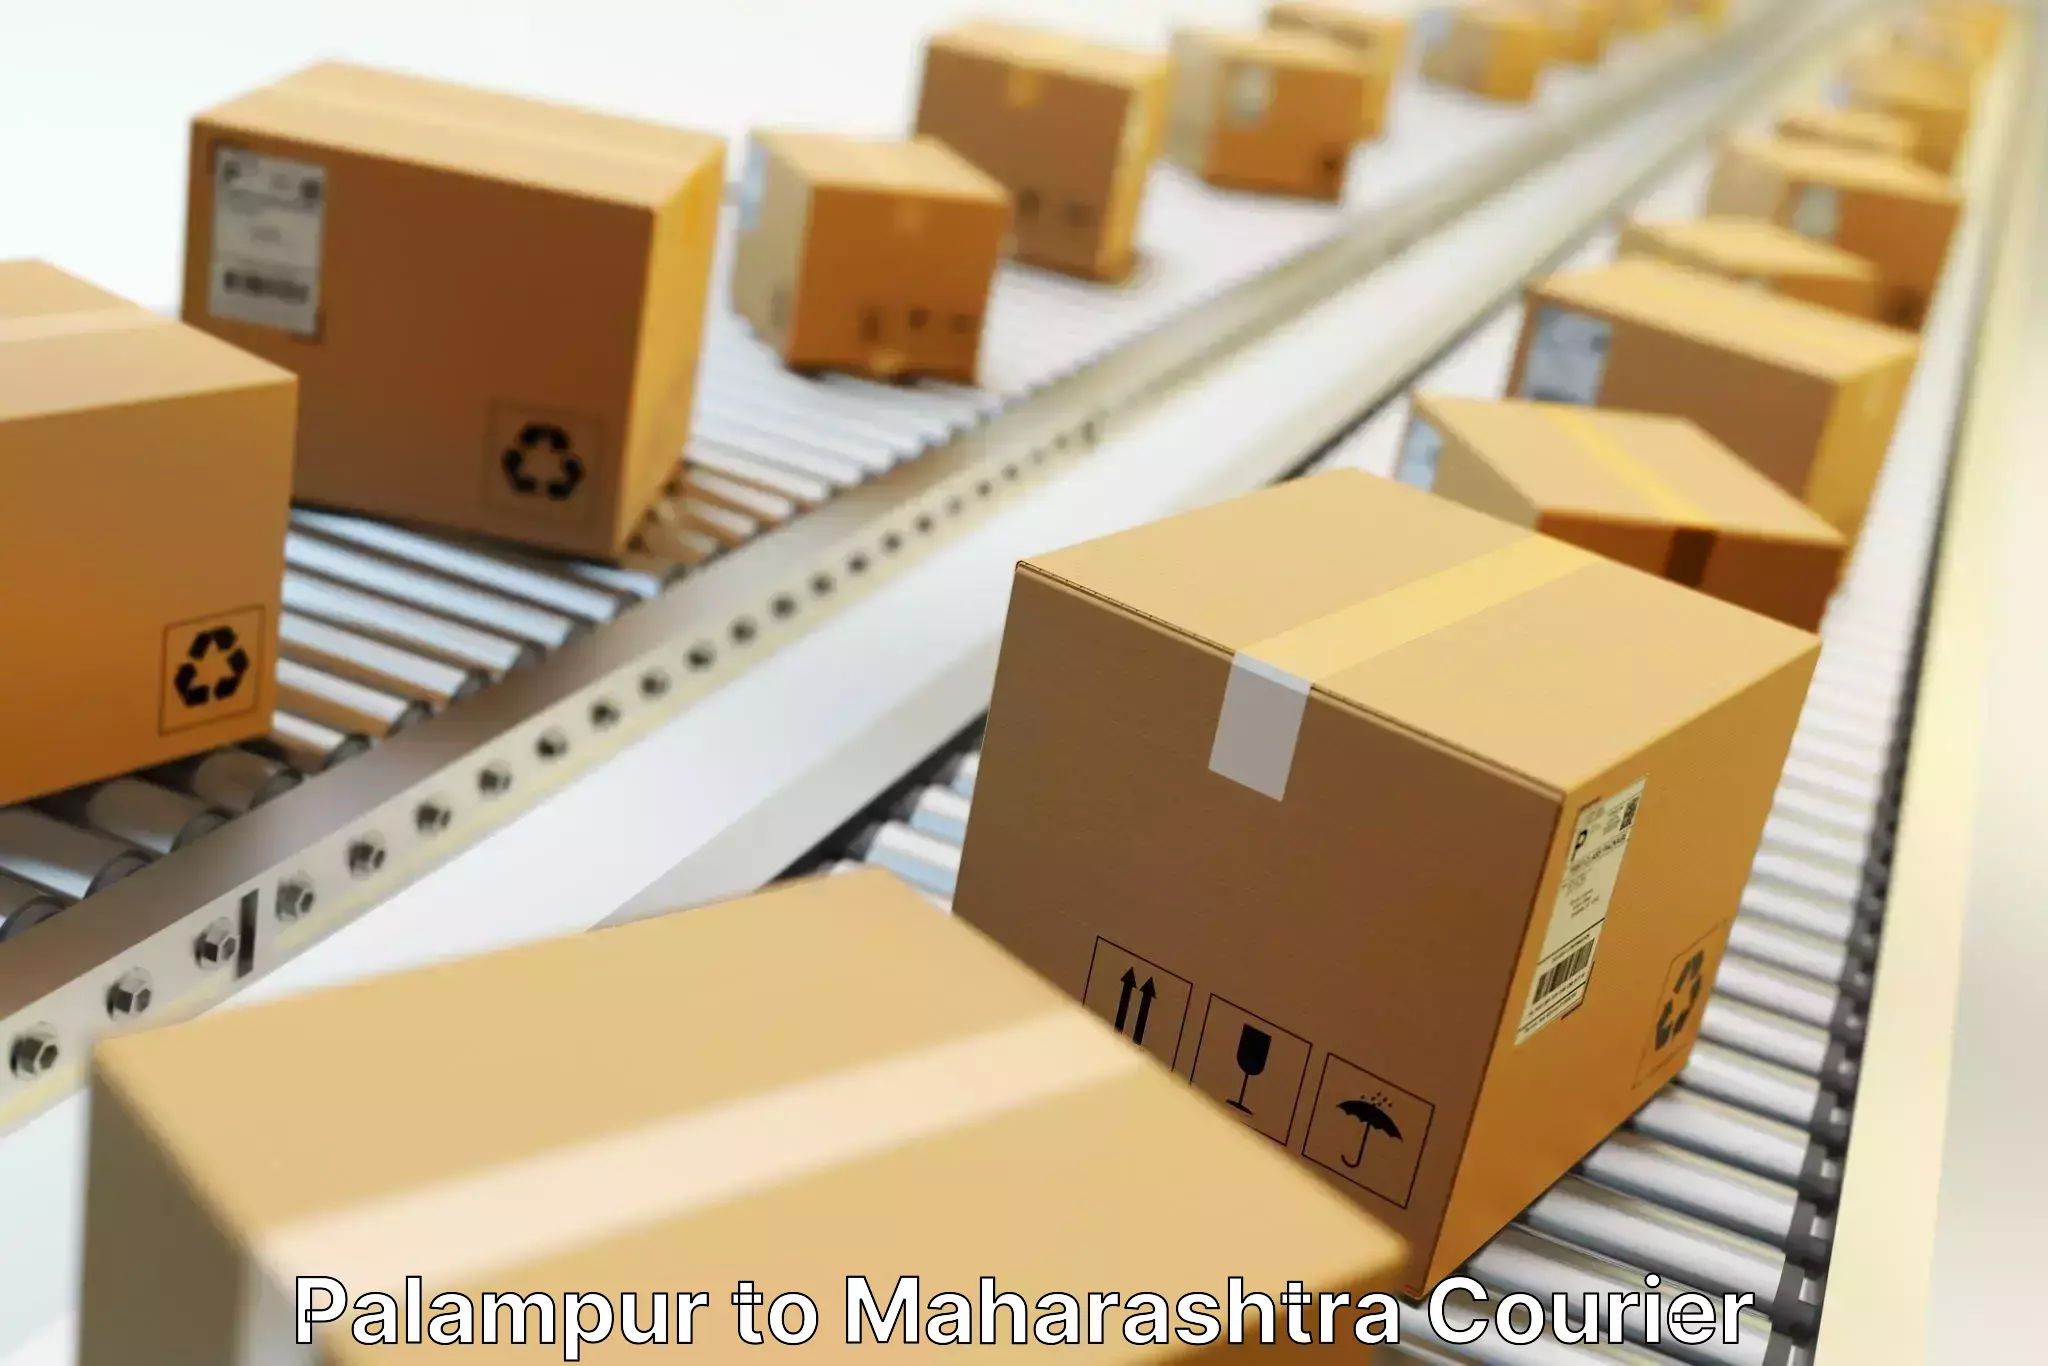 Subscription-based courier Palampur to Chiplun